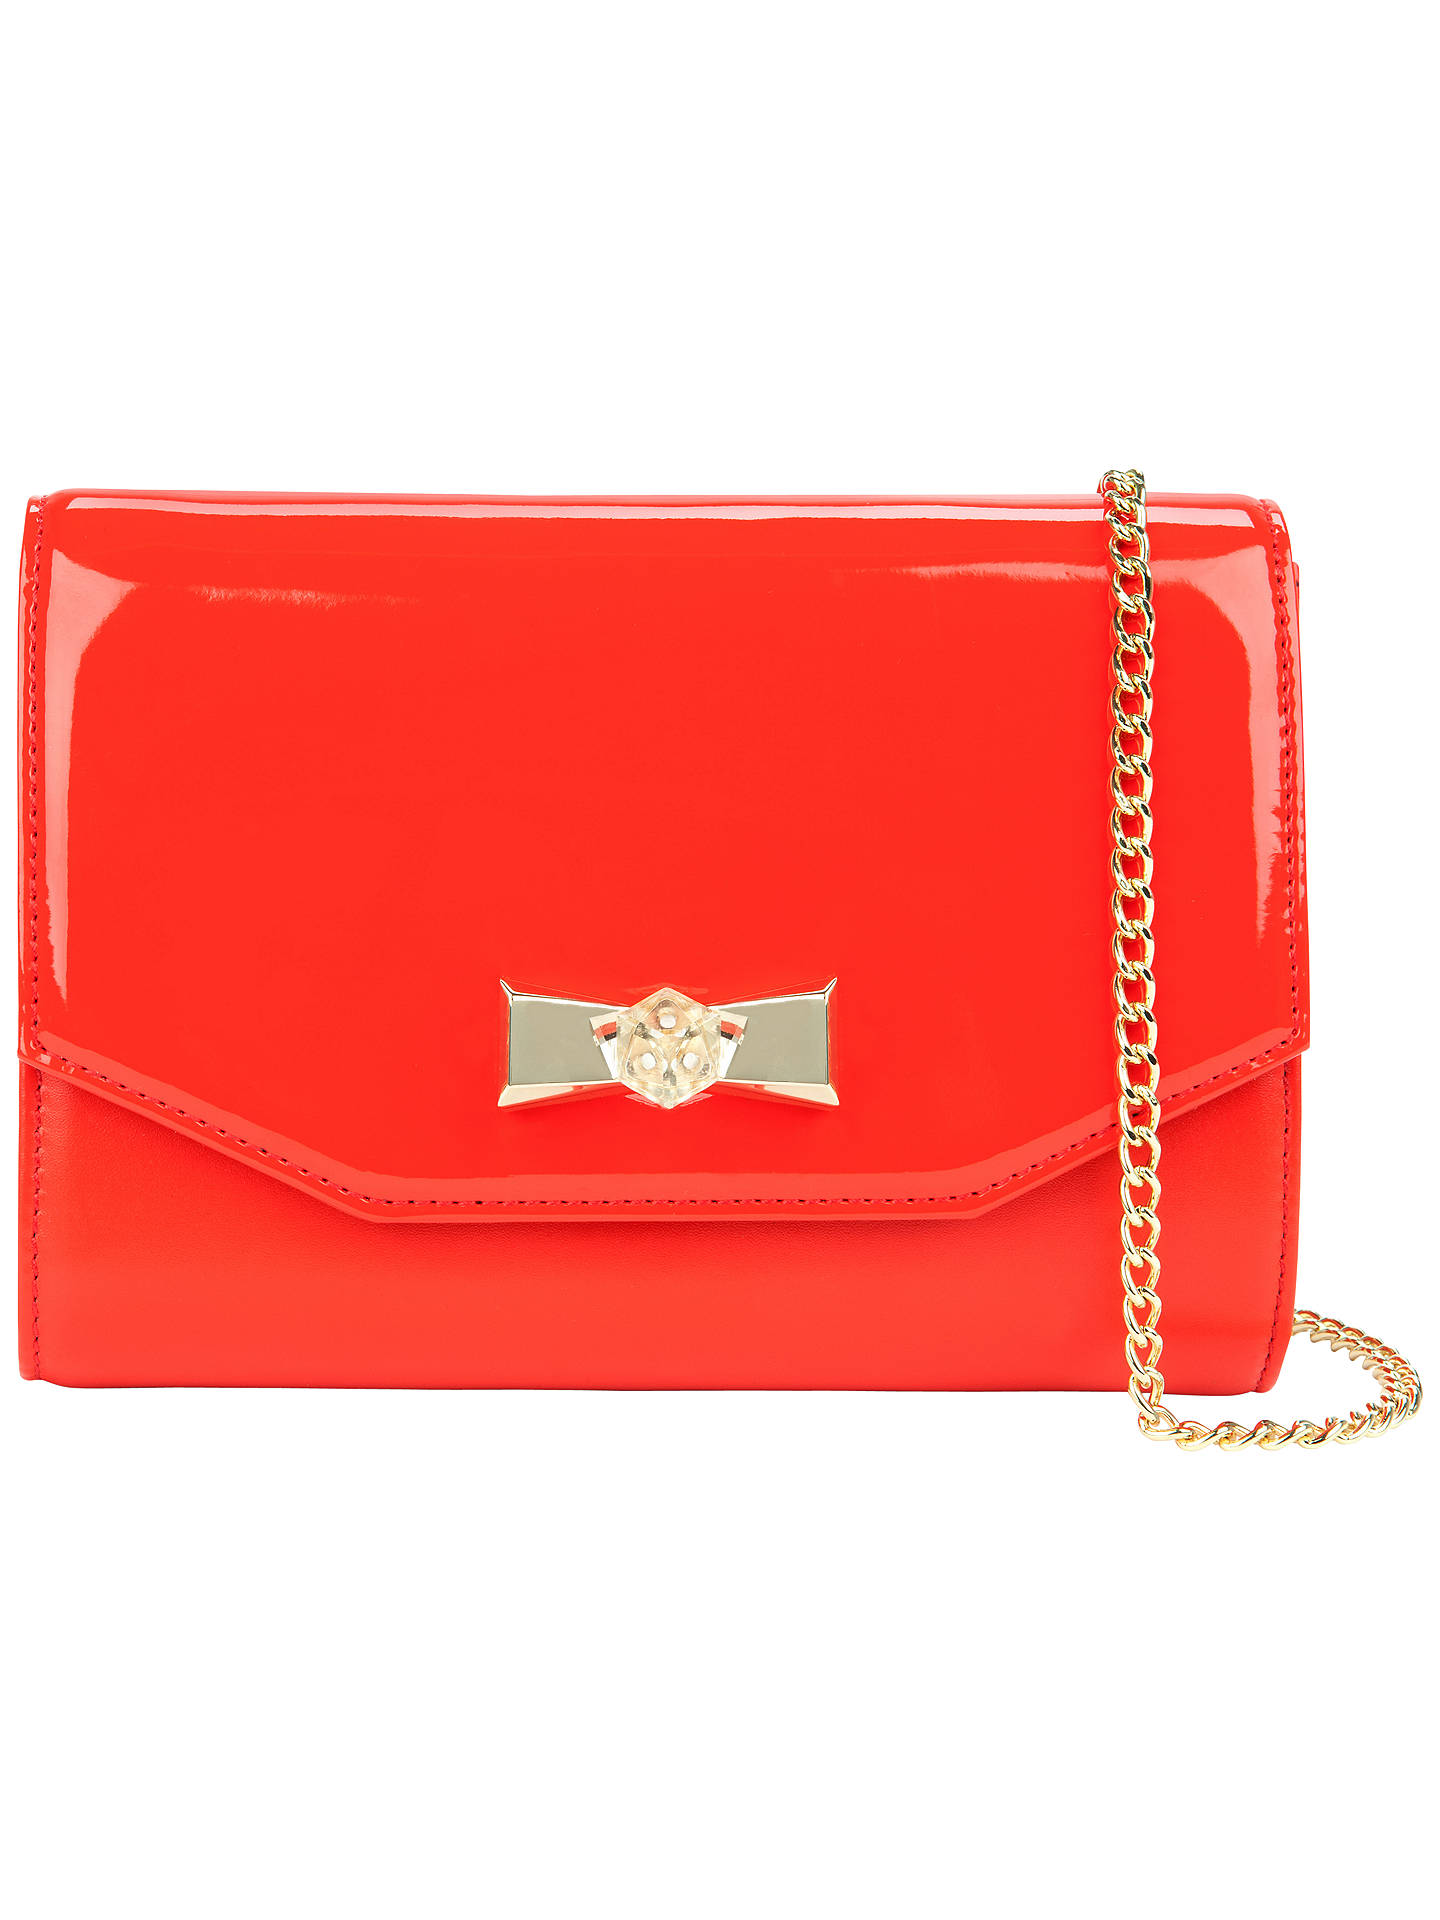 Ted Baker Evana Leather Across Body Clutch Bag at John Lewis & Partners